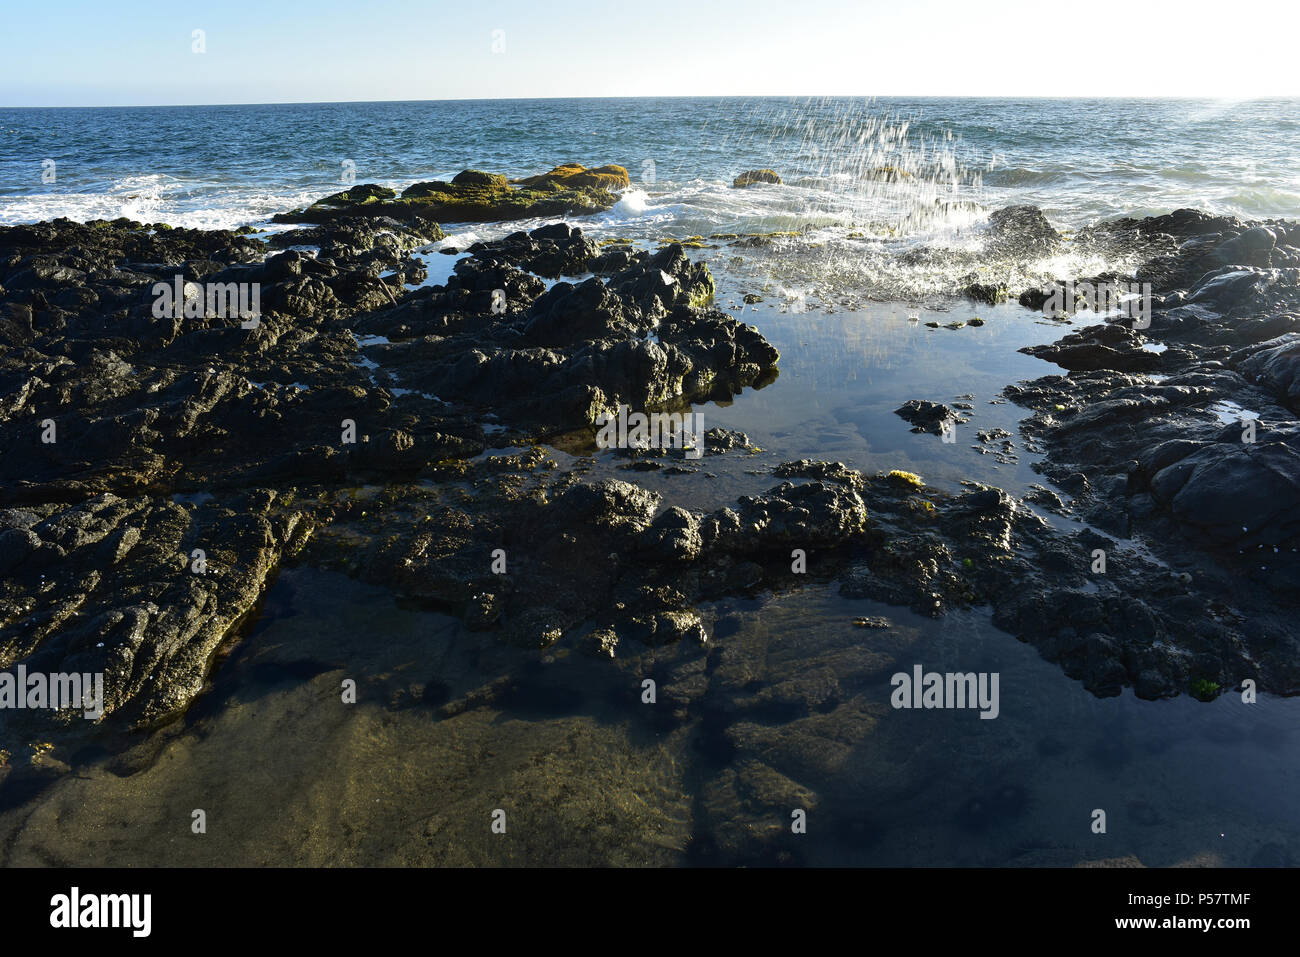 splashing wave of pacific reflected in calm tidal pool amid rocks Stock Photo